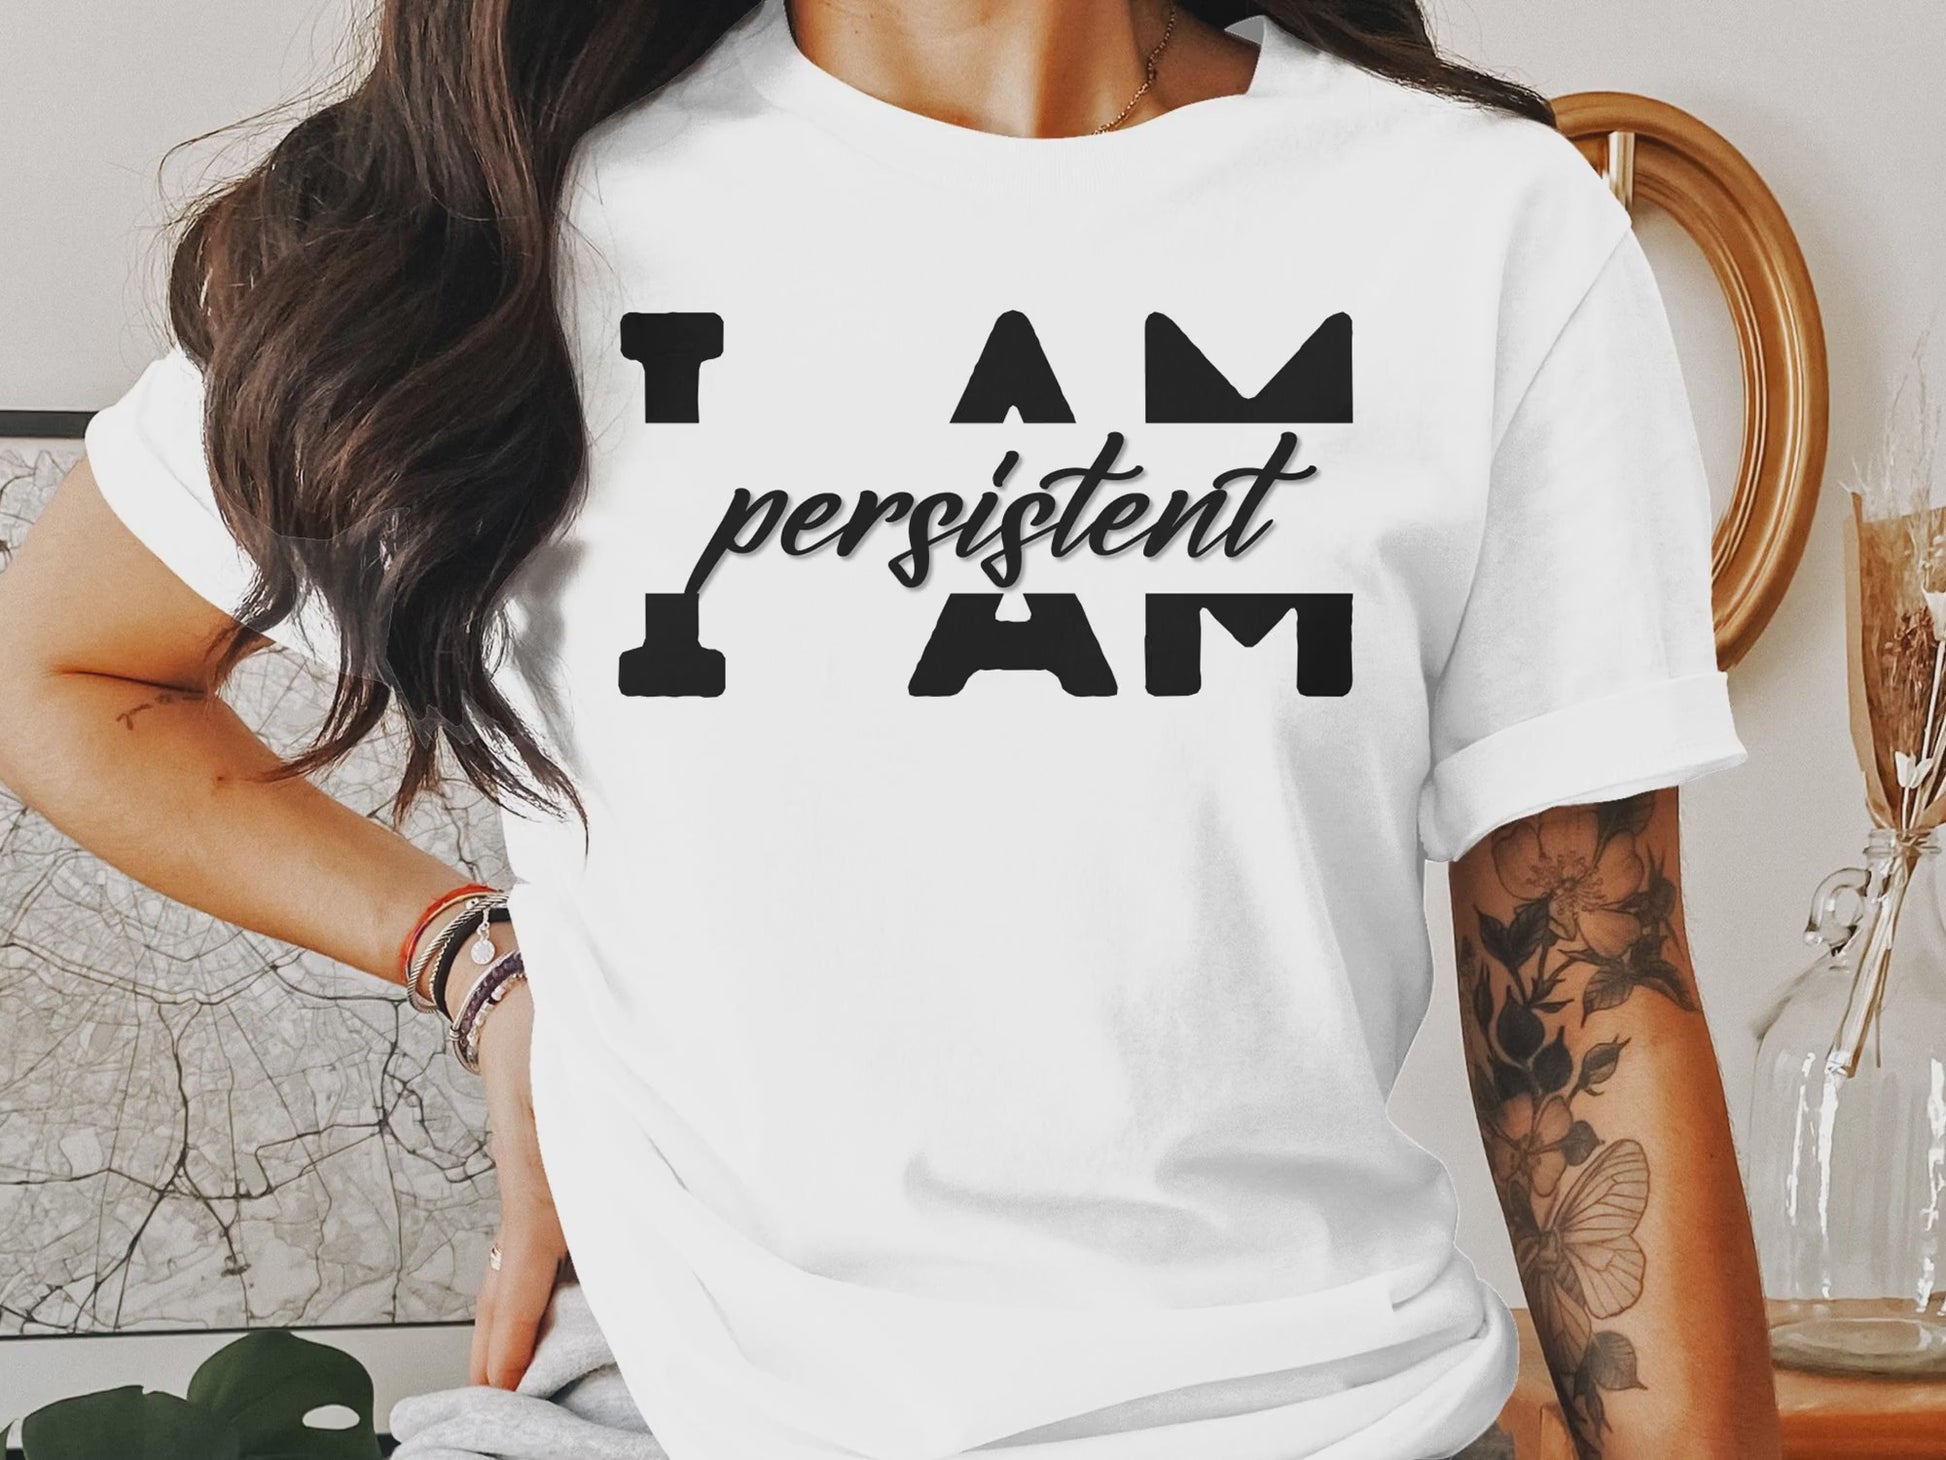 video I Am Persistent - An encouraging and motivating Affirmation Quote T-shirt.